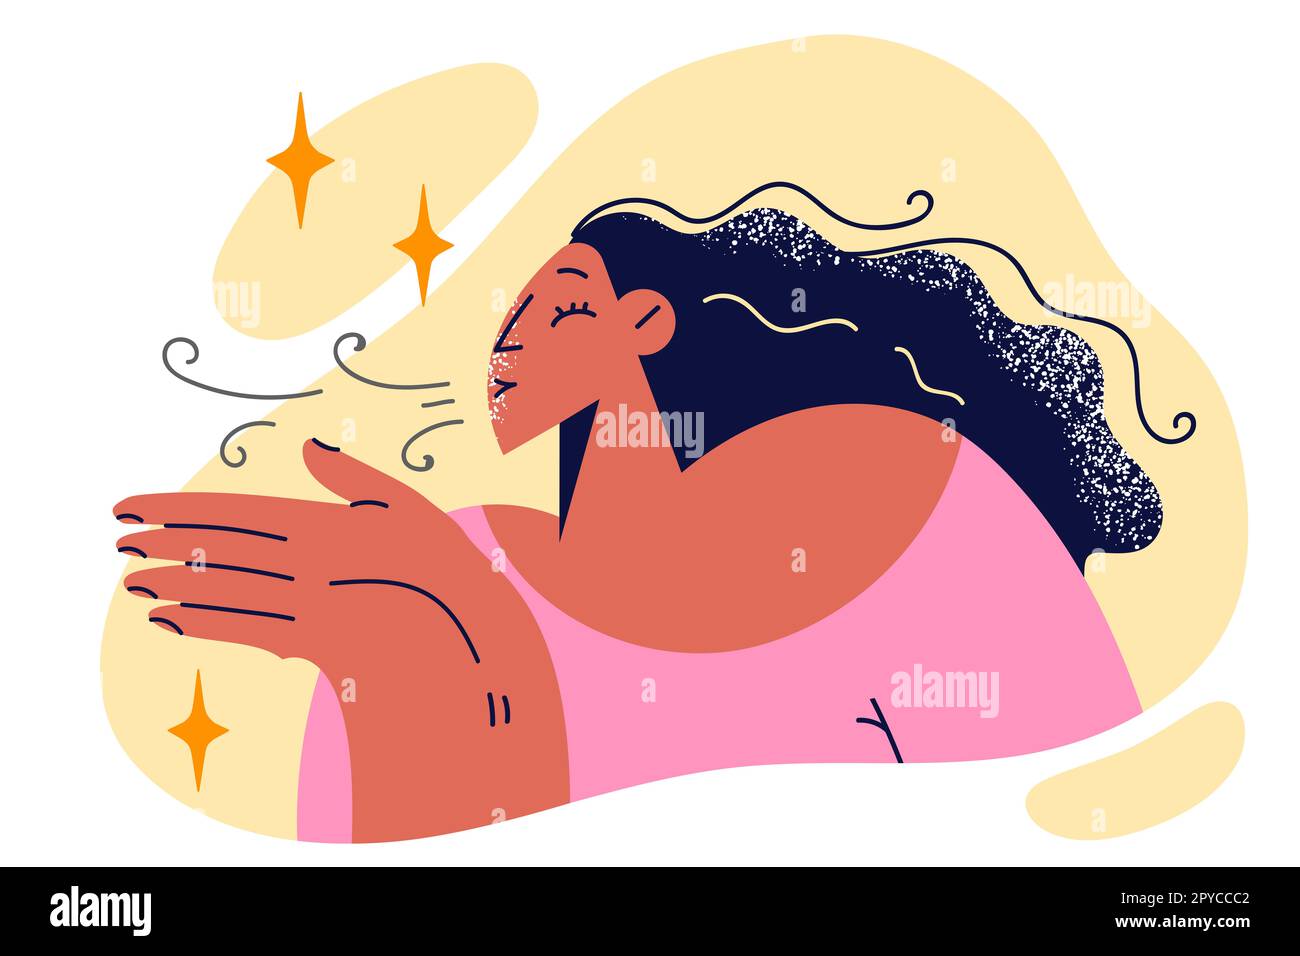 Woman does breathing exercise to support lung health and raises palm to face. Positive woman with long hair blowing on hands to warm up or enjoy pleas Stock Photo